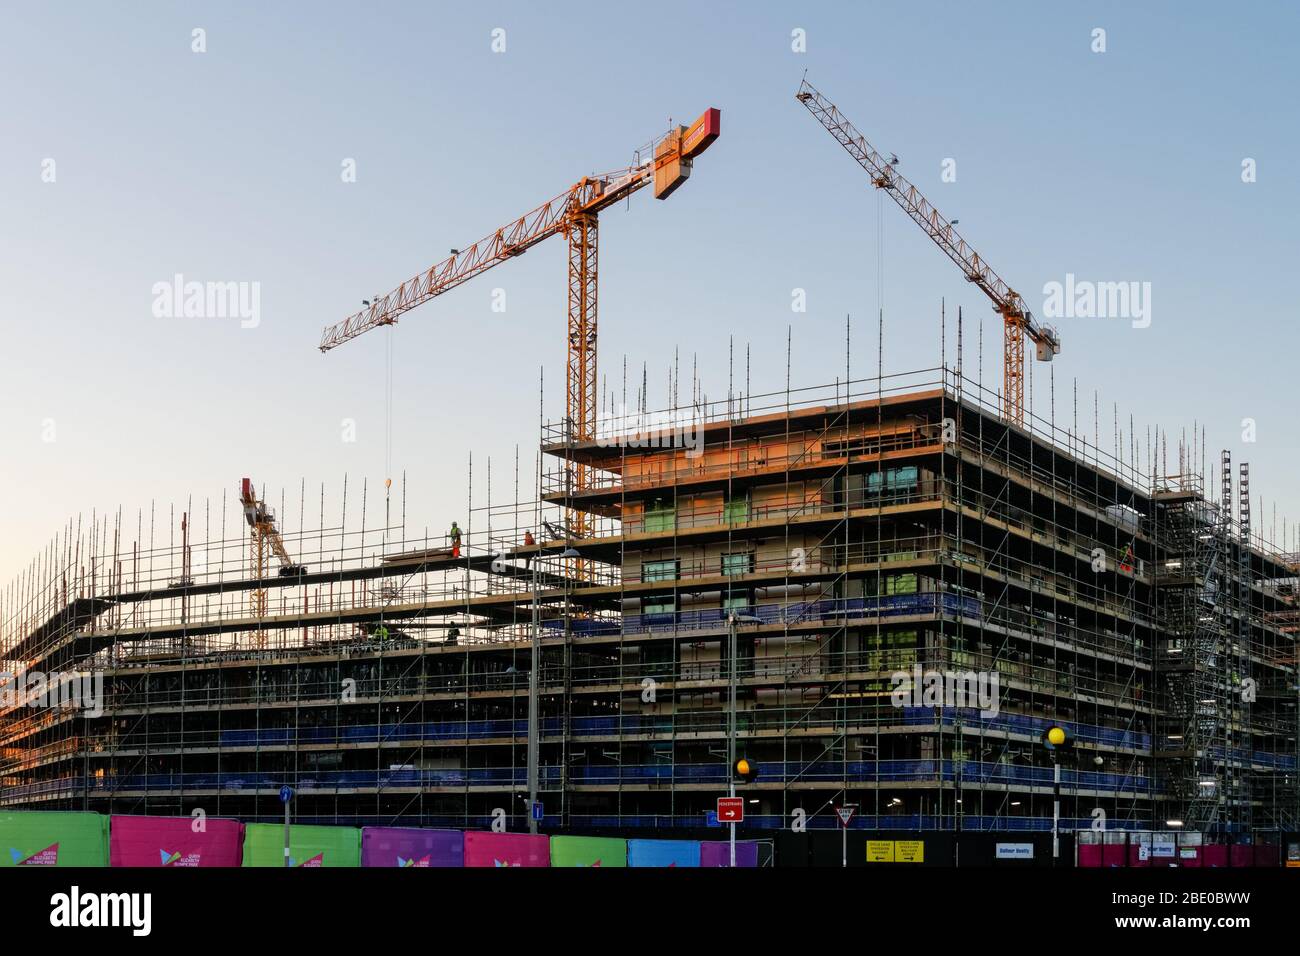 Construction site of residential building at Stratford, London England United Kingdom UK Stock Photo